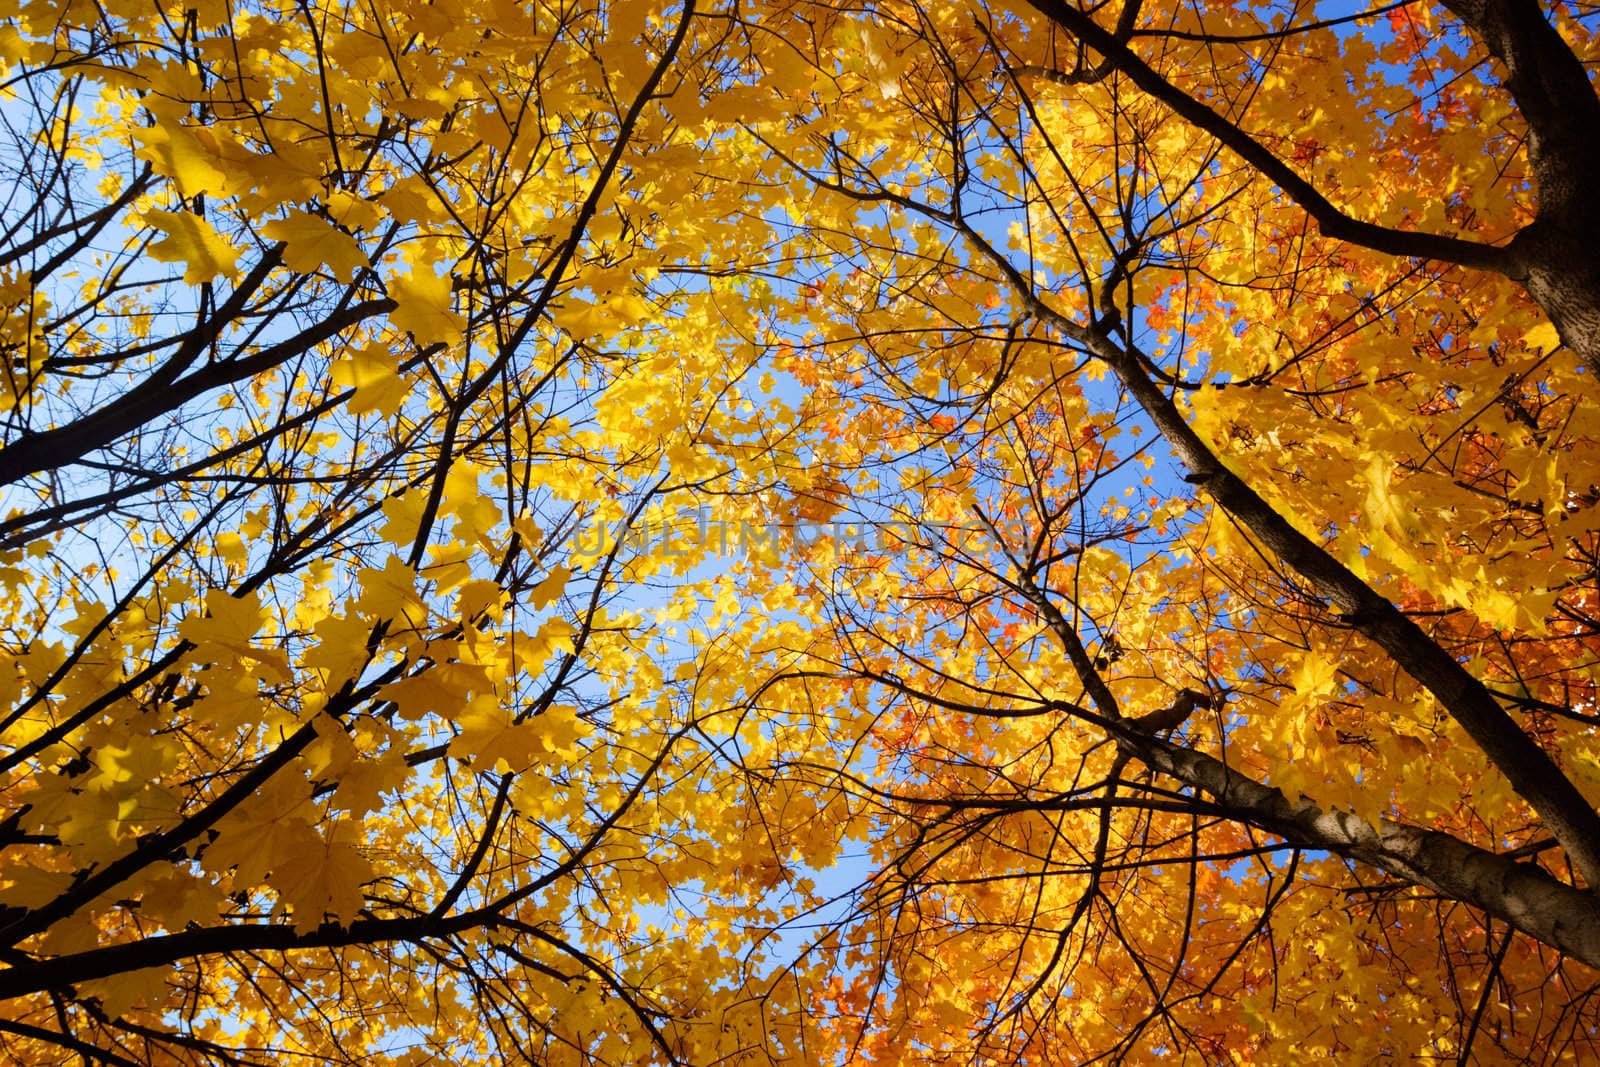 Yellow and red leaves on maple tree against clear blue sky at Autumn